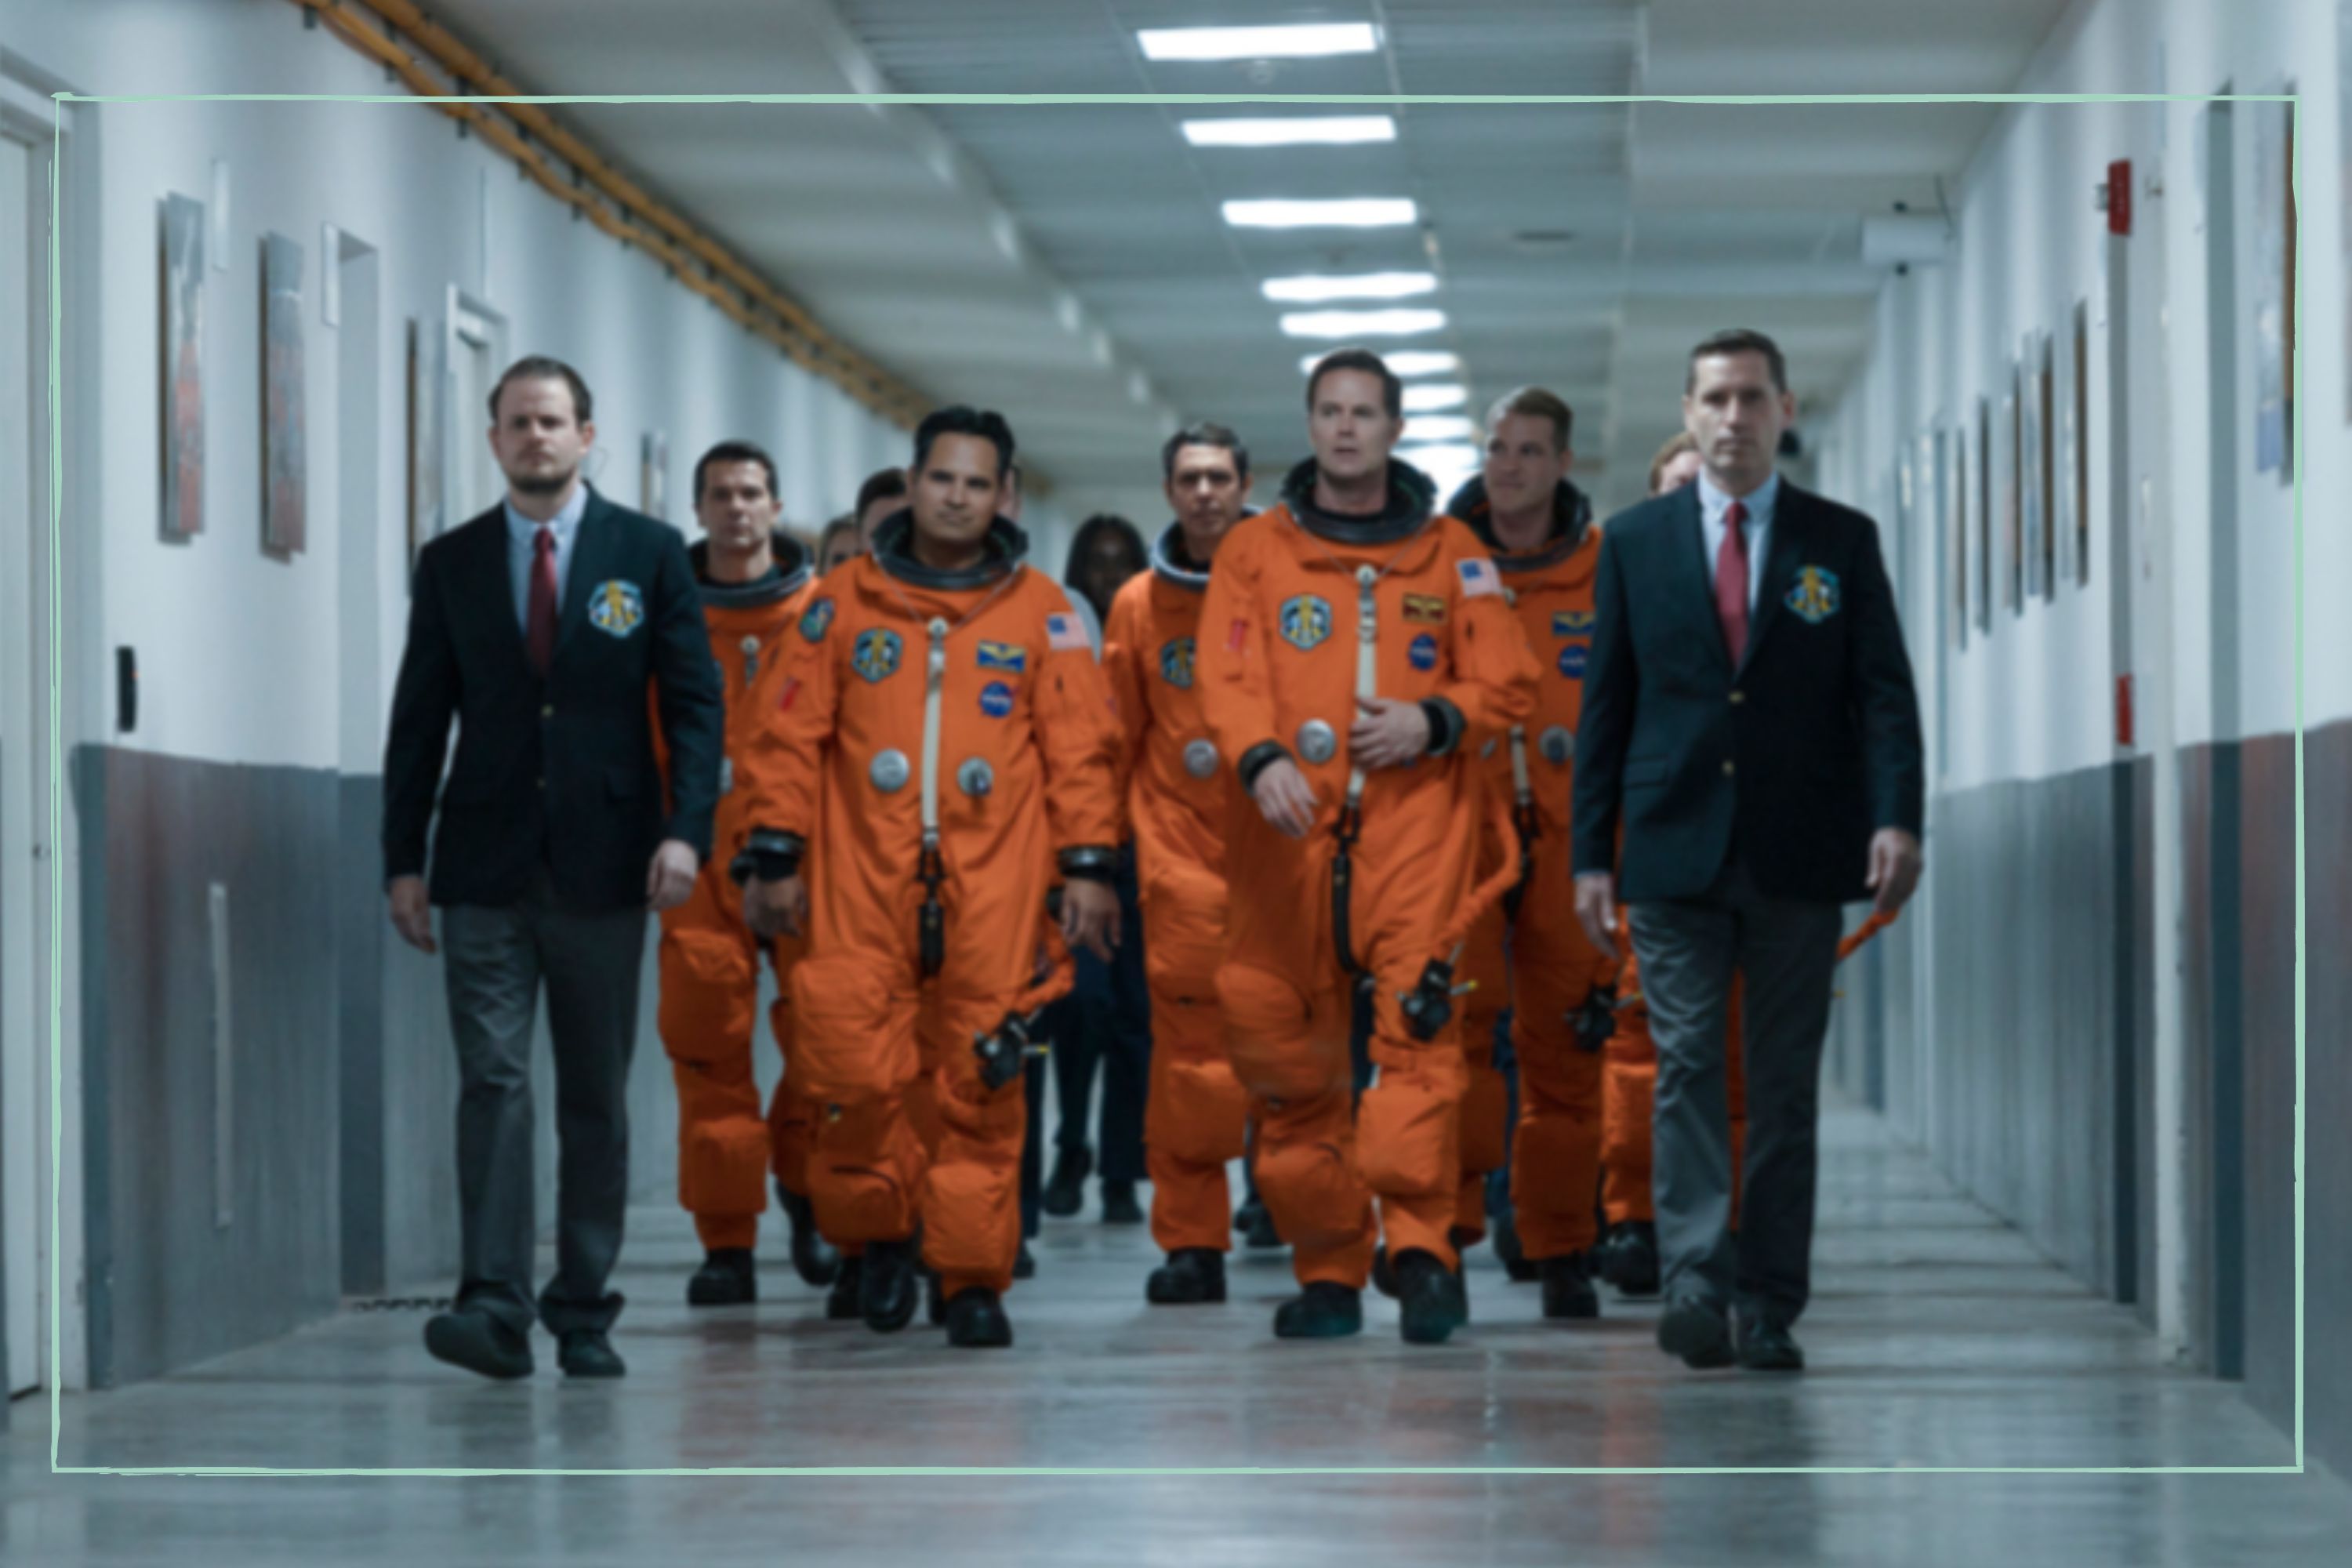 Here's how to watch Stockton astronaut movie 'A Million Miles Away